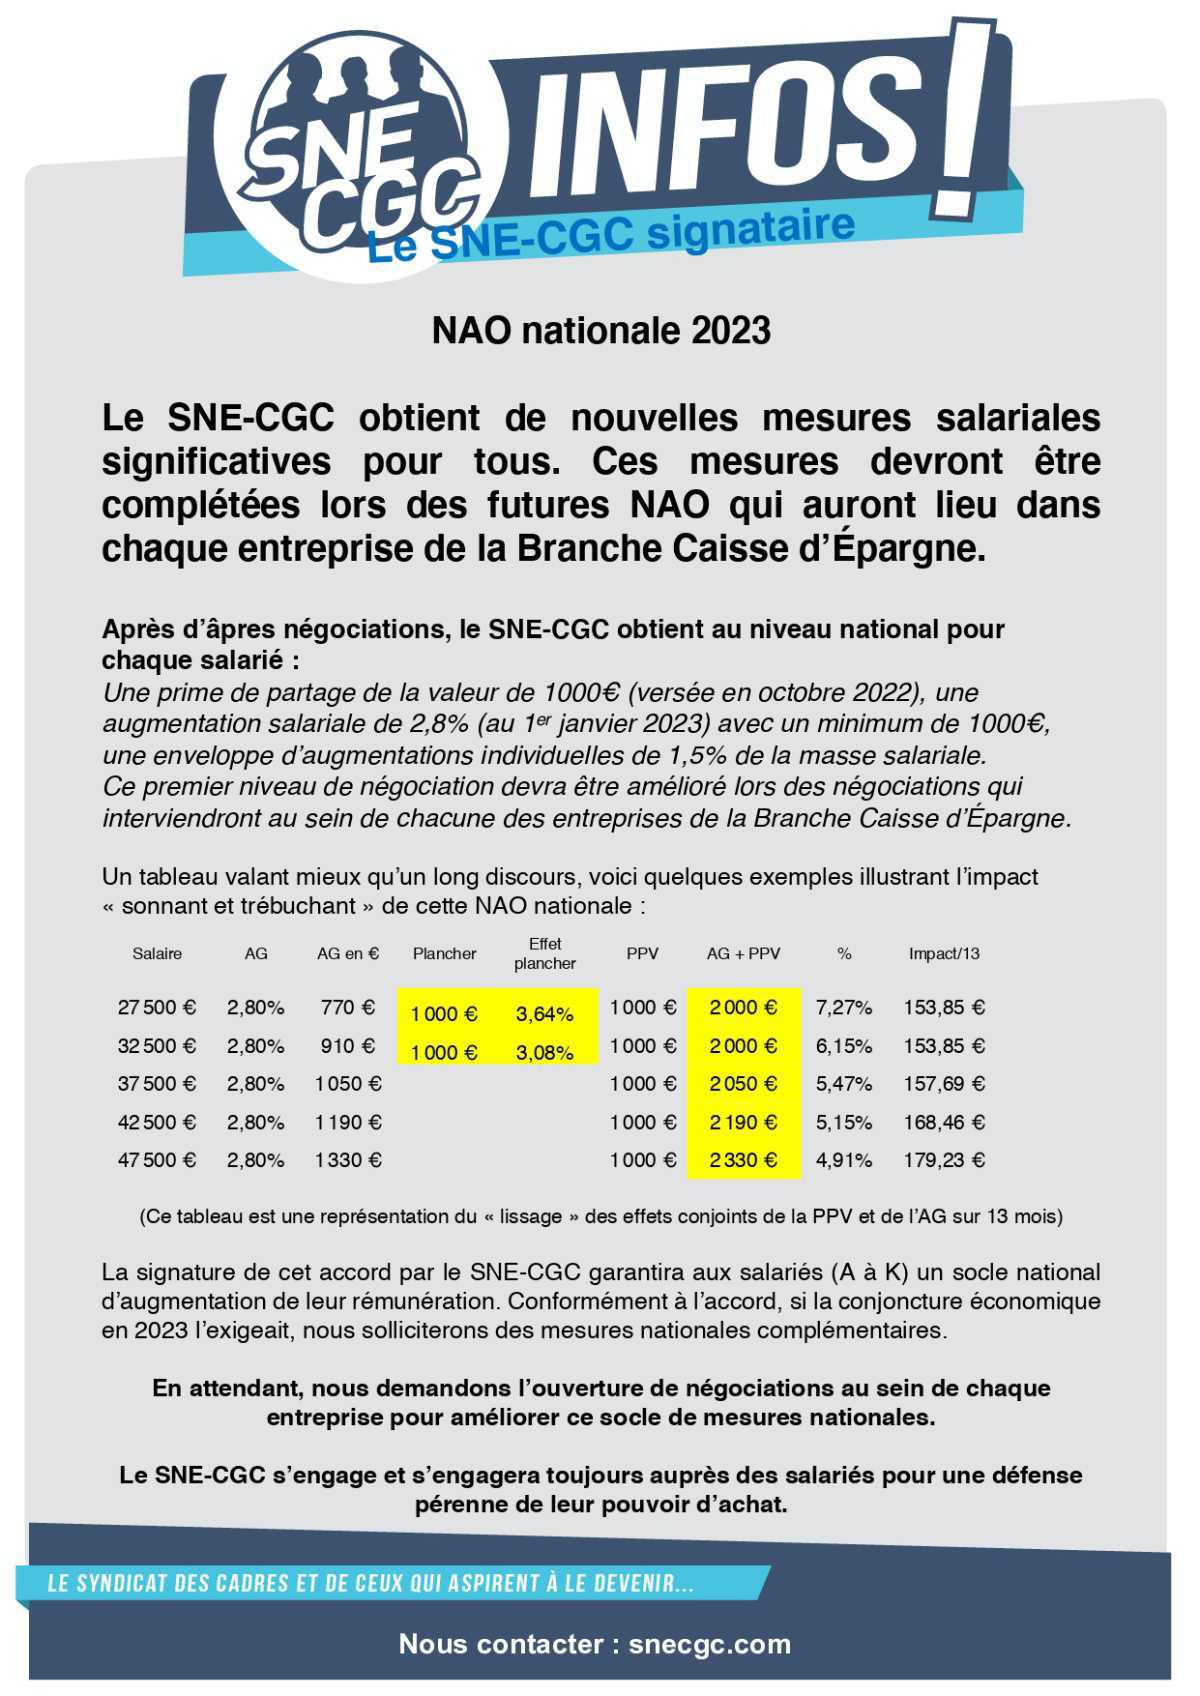 NAO Nationales : Le SNE-CGC signataire